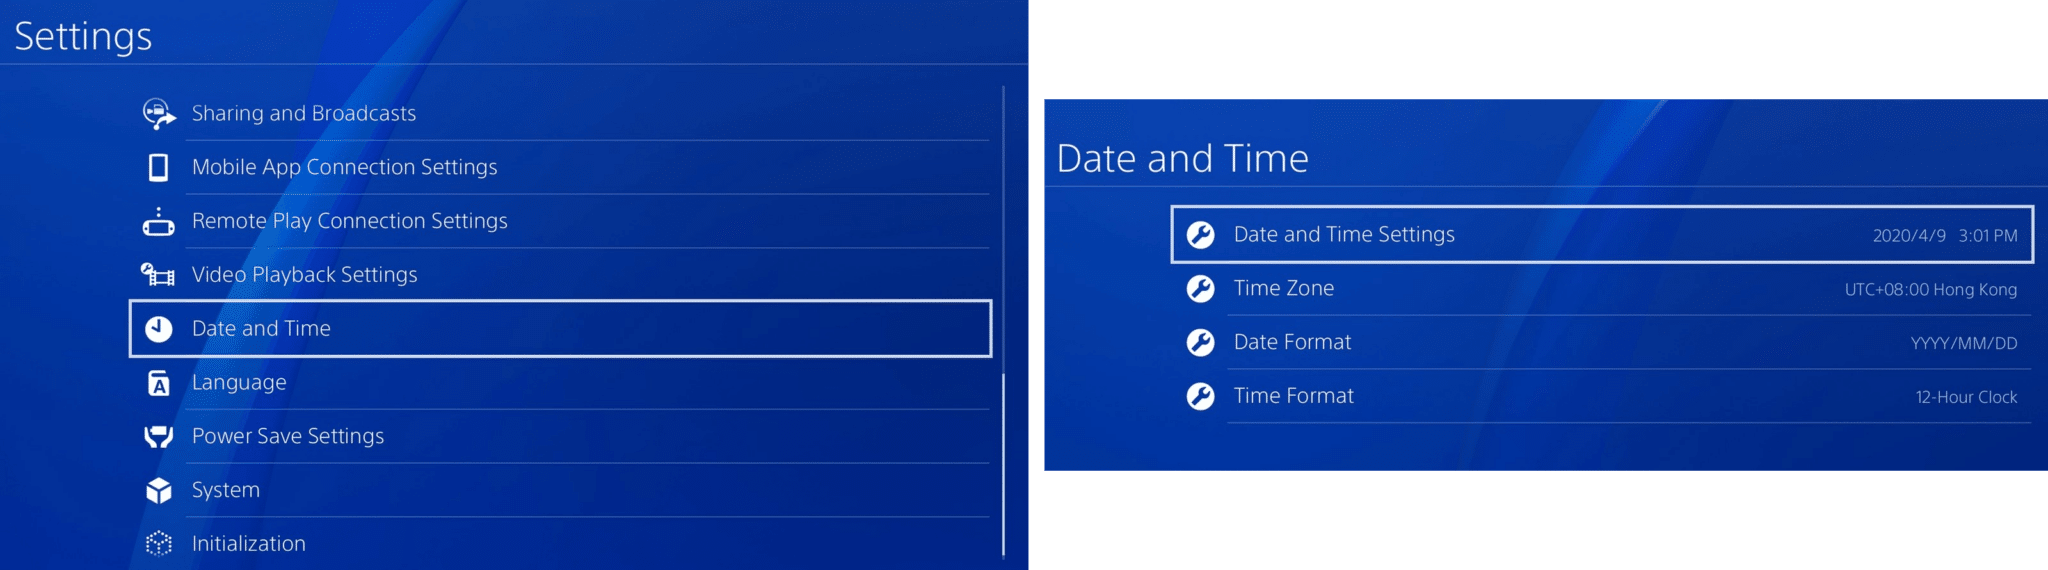 Checking date and time settings PS4 to fix unable to connect to EA servers error